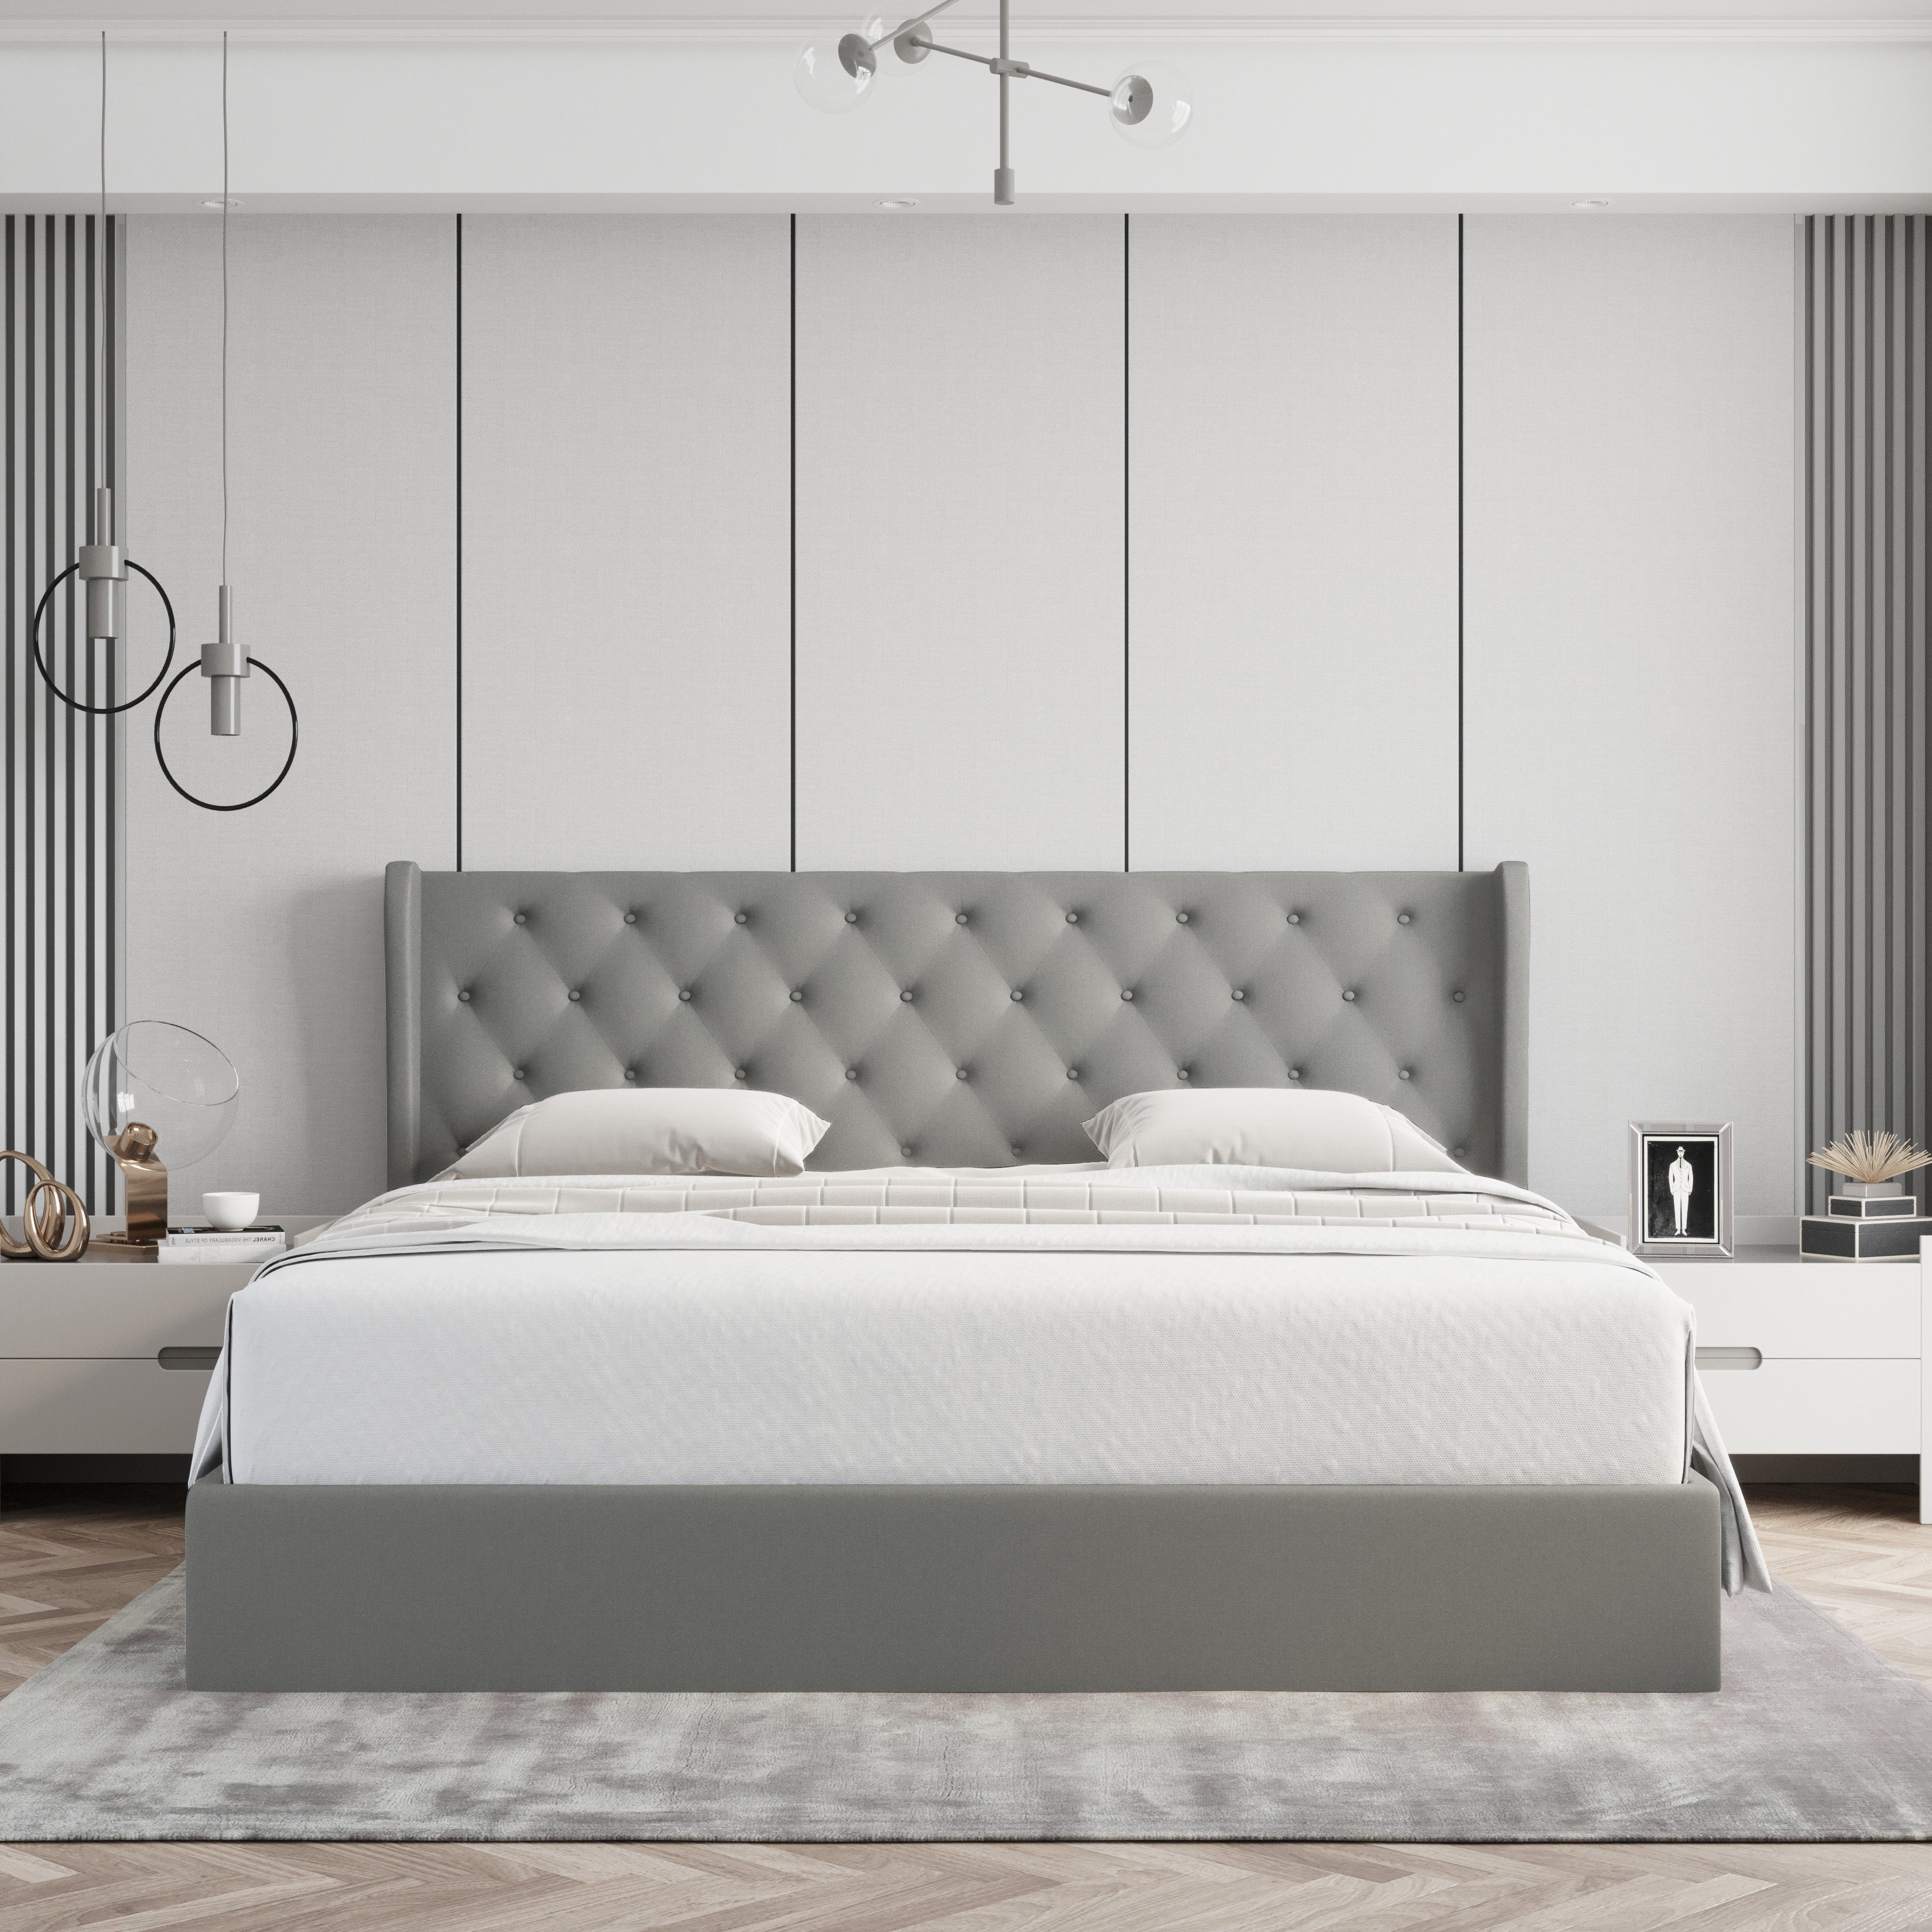 Velets Diva Contemporary Mid-Century Soft Padded Tufted Upholstered Platform Bed With Hydraulic Gas Lift Storage - Solid Wood Frame, Wood Slat System & Smart Hydraulic Under-Bed Storage - Light Gray